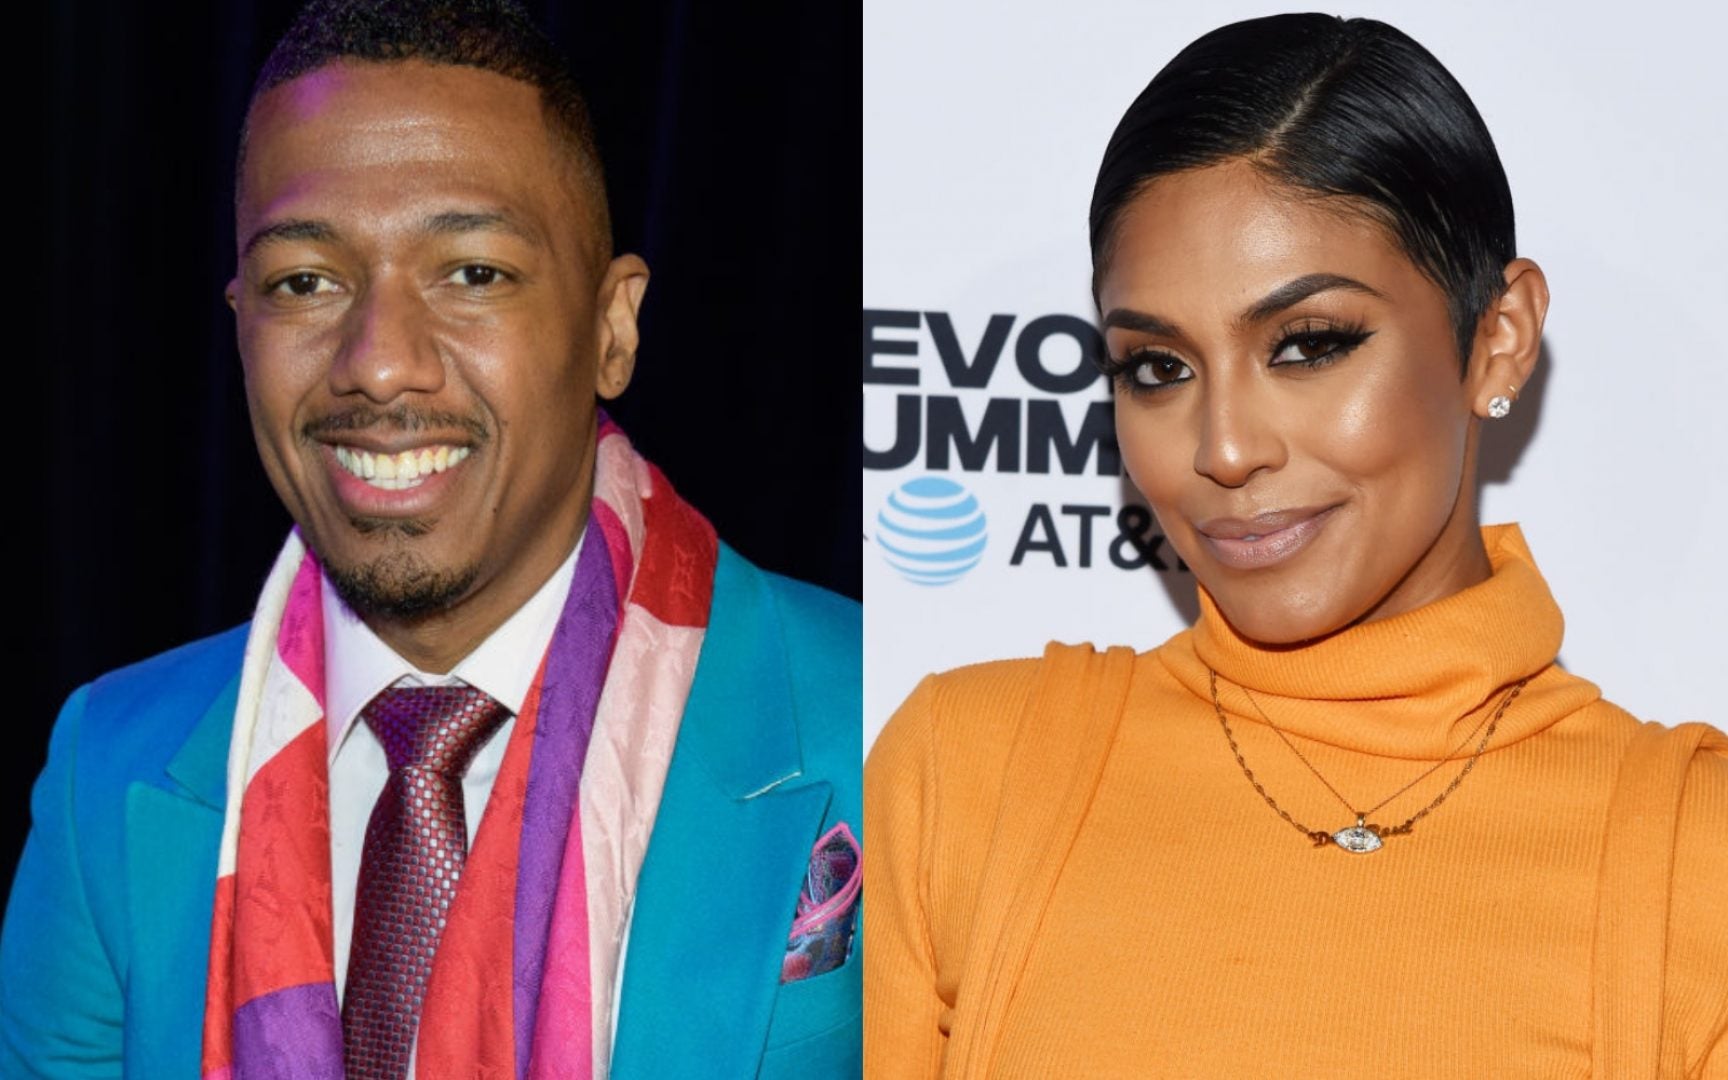 Nick Cannon And Abby De La Rosa Celebrate Their Twins At Baby Shower